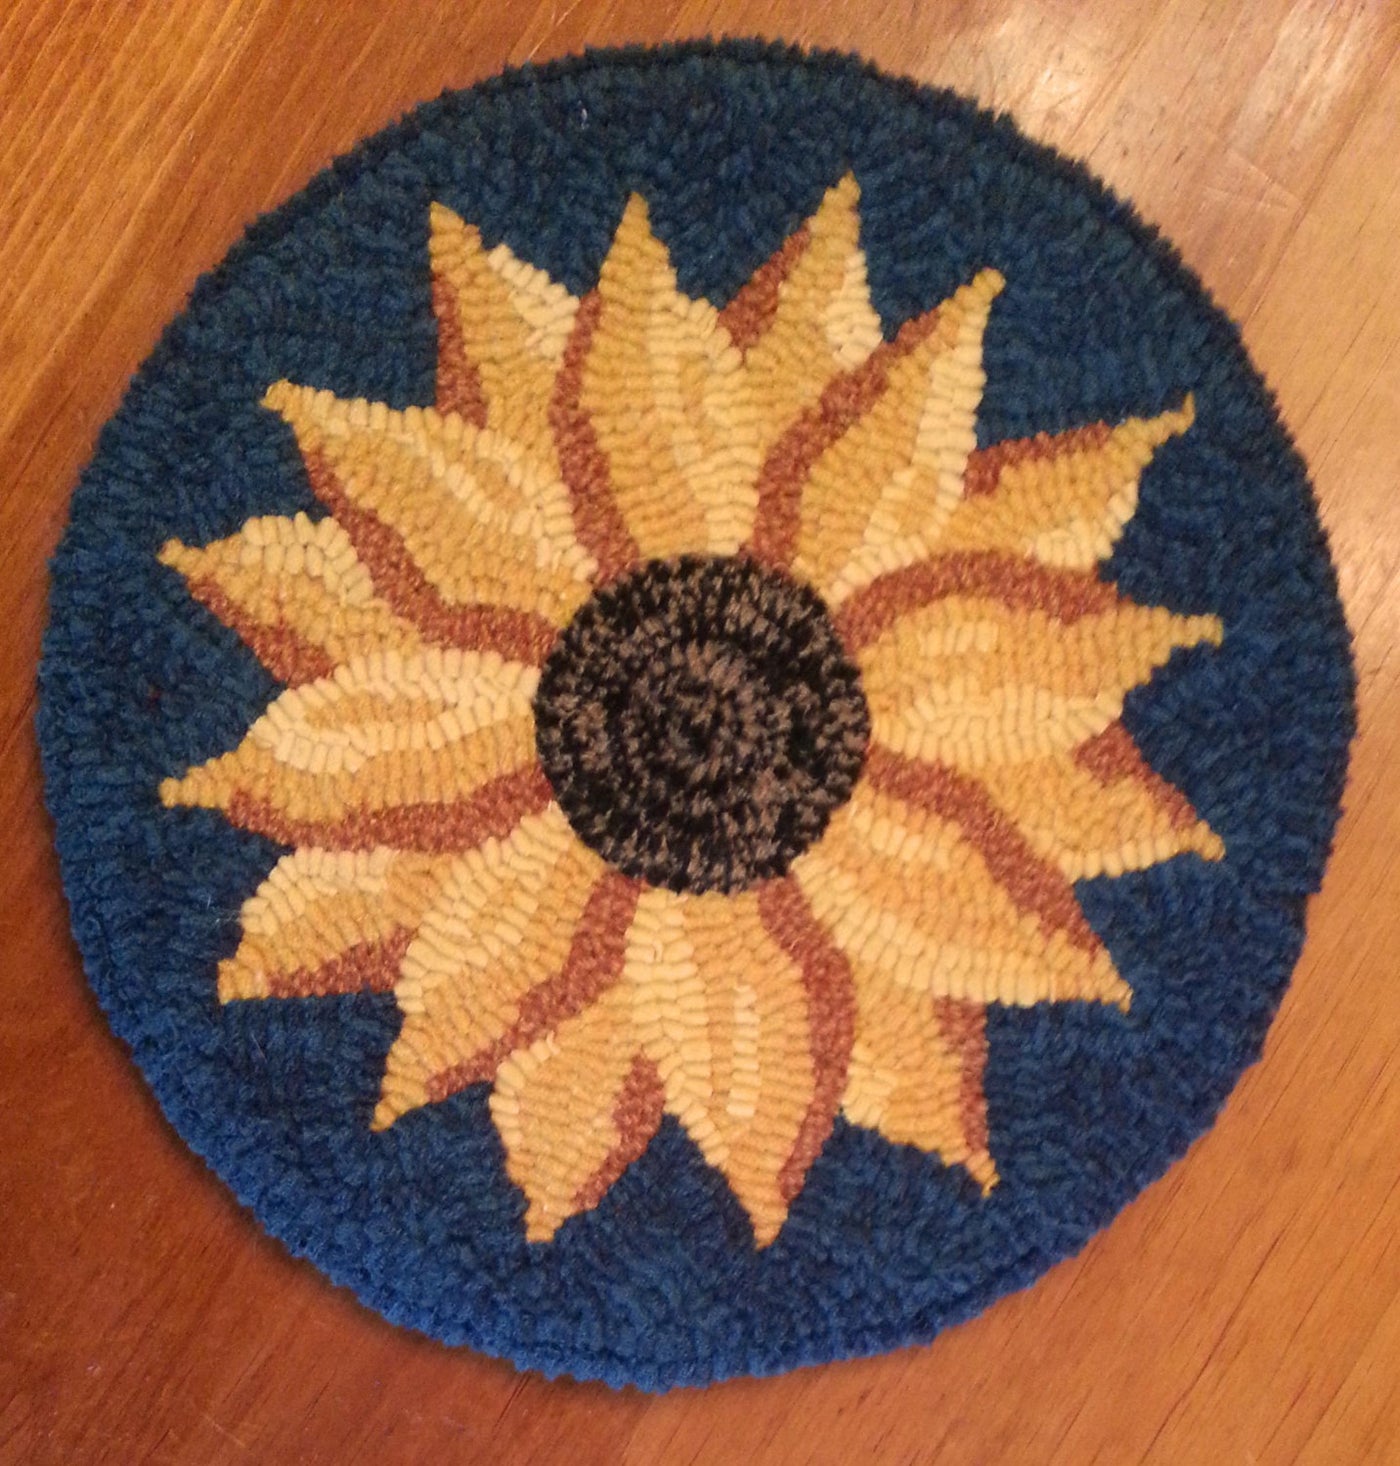 Evening Sunflower - Chair Pad *PATTERN ONLY* 12 Hooked Rug